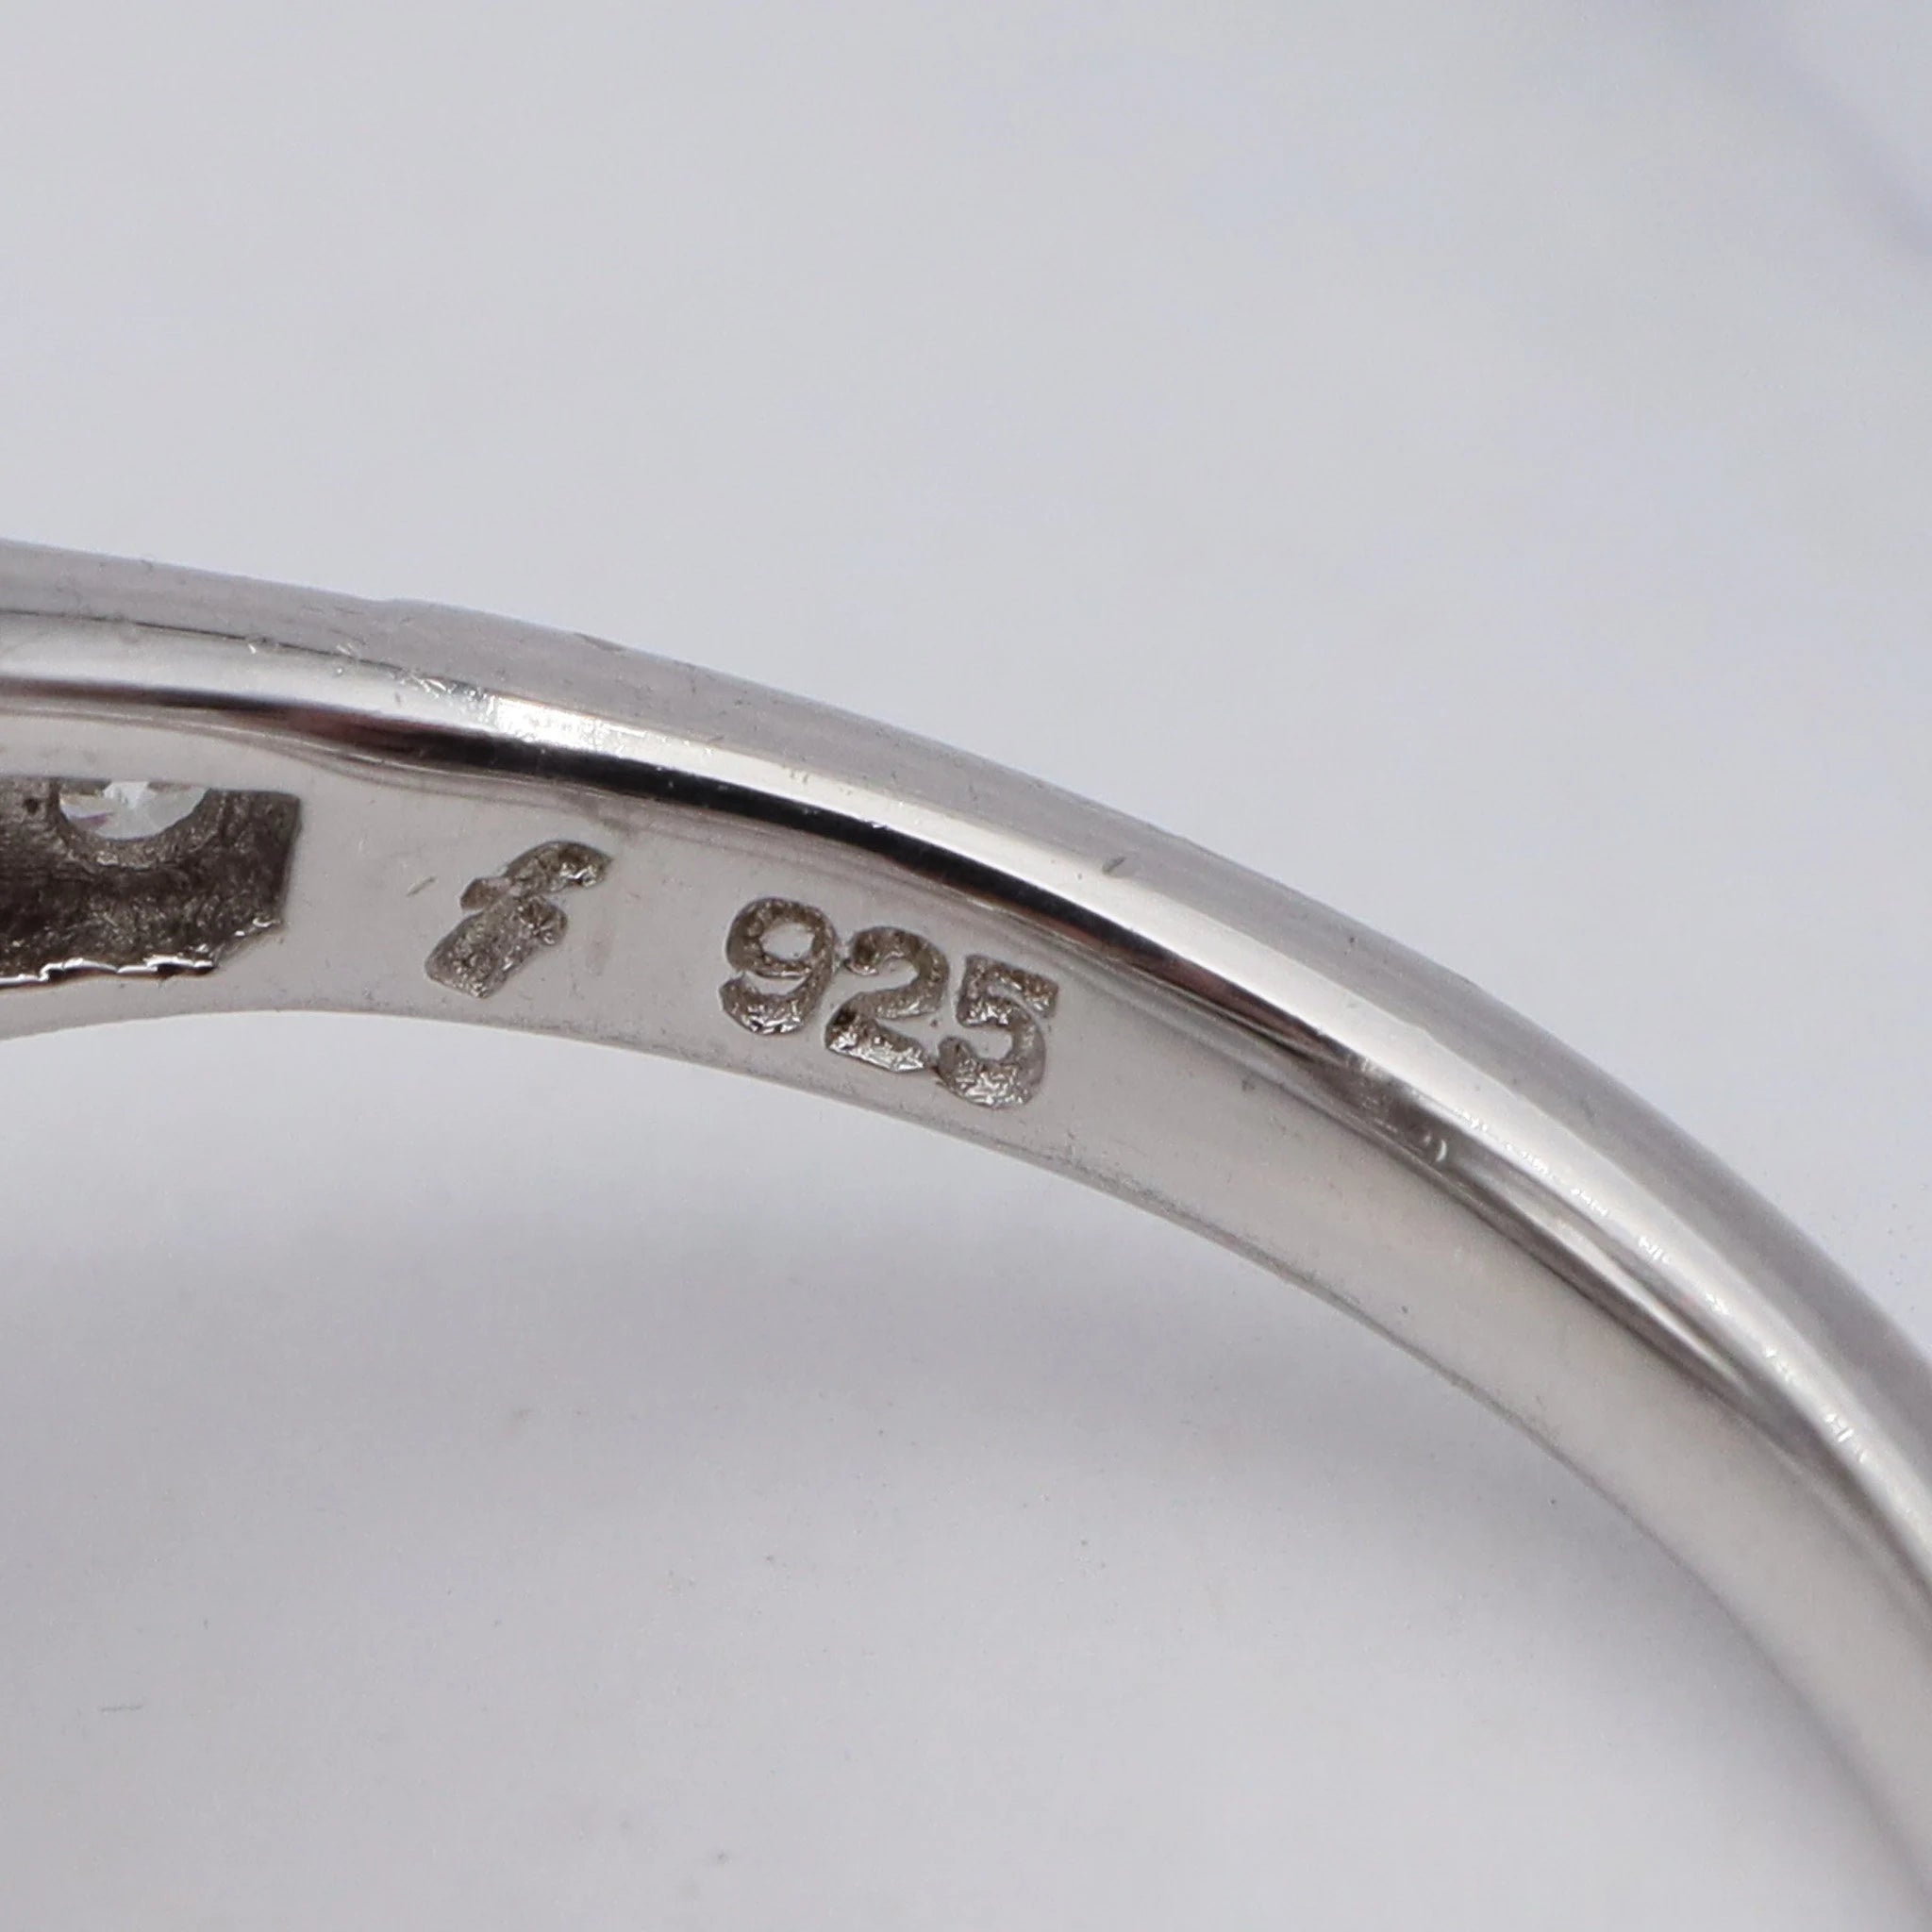 This vintage Stauer sterling & cubic zirconia cocktail ring, sz 7